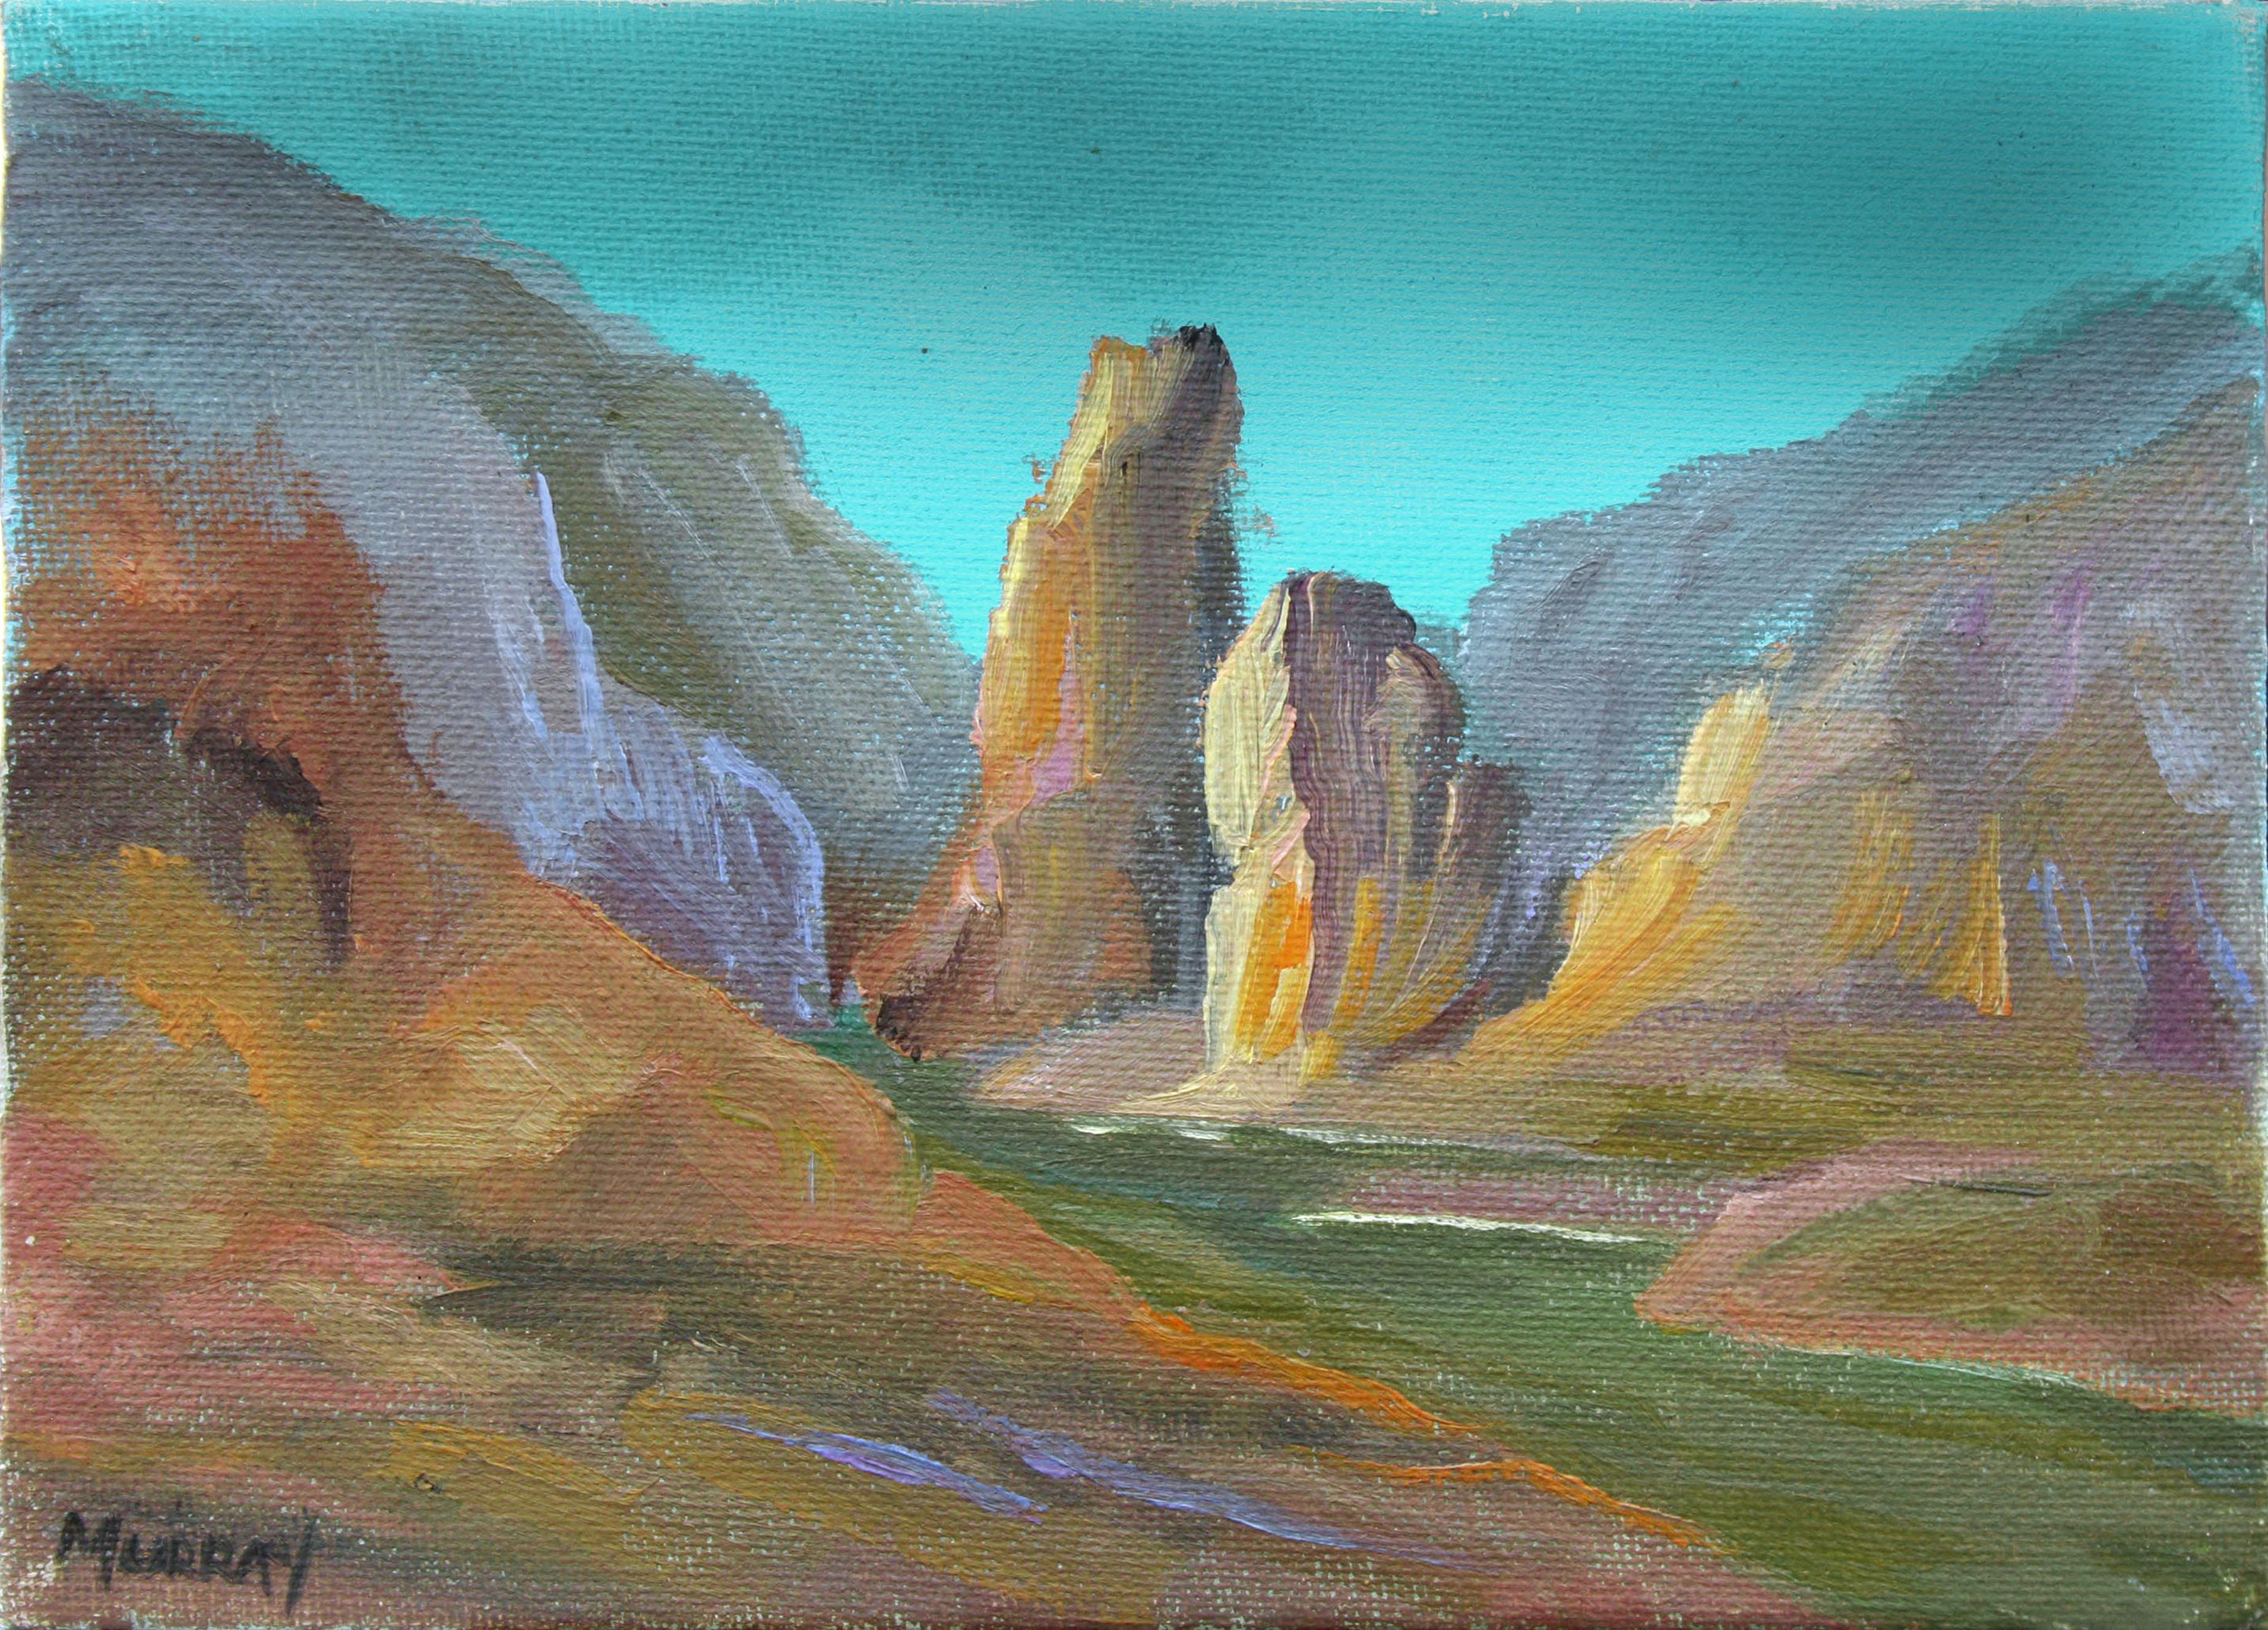 Vivid diminutive oil painting of the Grand Canyon by Kathleen Murray (American, b.1958). Signed in the lower left corner. Unframed. Image size: 5"H x 7 "W 

Kathleen Murray (American, b. 1958) was born in Los Angeles, California. In the early 1970s,